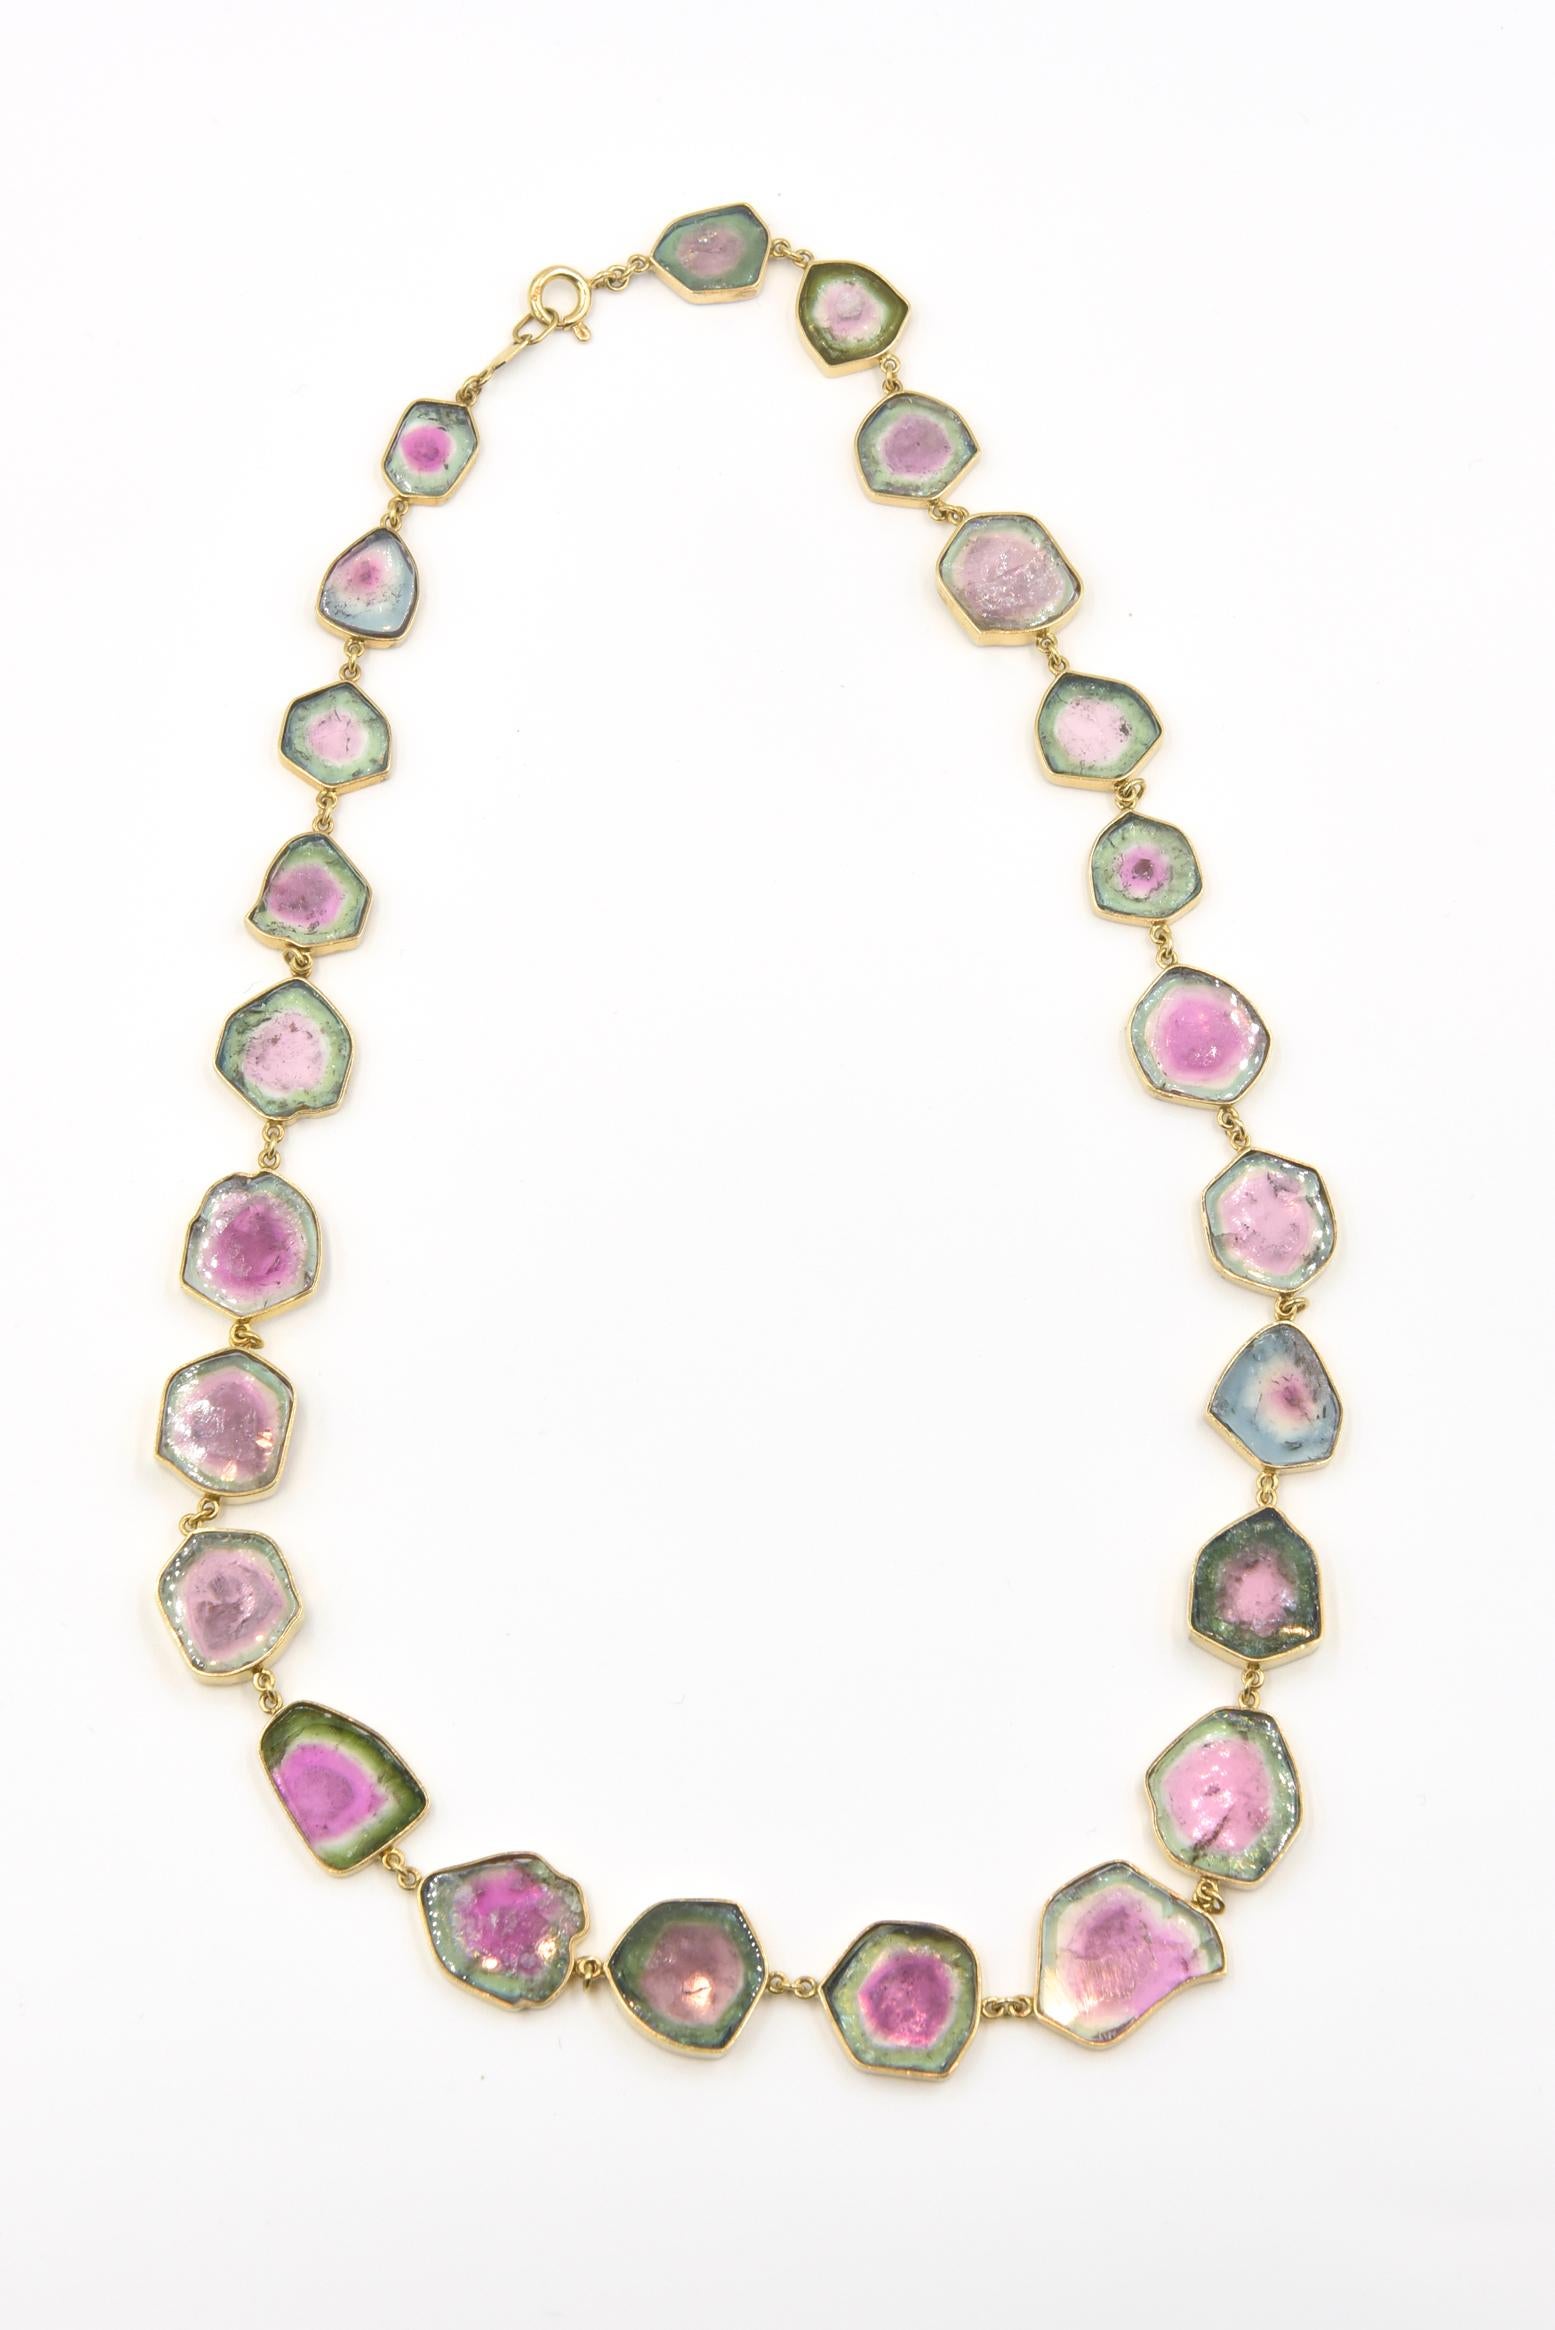 Beautifully made to feature this collection of watermelon tourmaline, each stone is surrounded by a 18k yellow gold hand made bezel then linked together and then terminating in an 18k jump ring clasp.  The necklace contains over 100 carats of